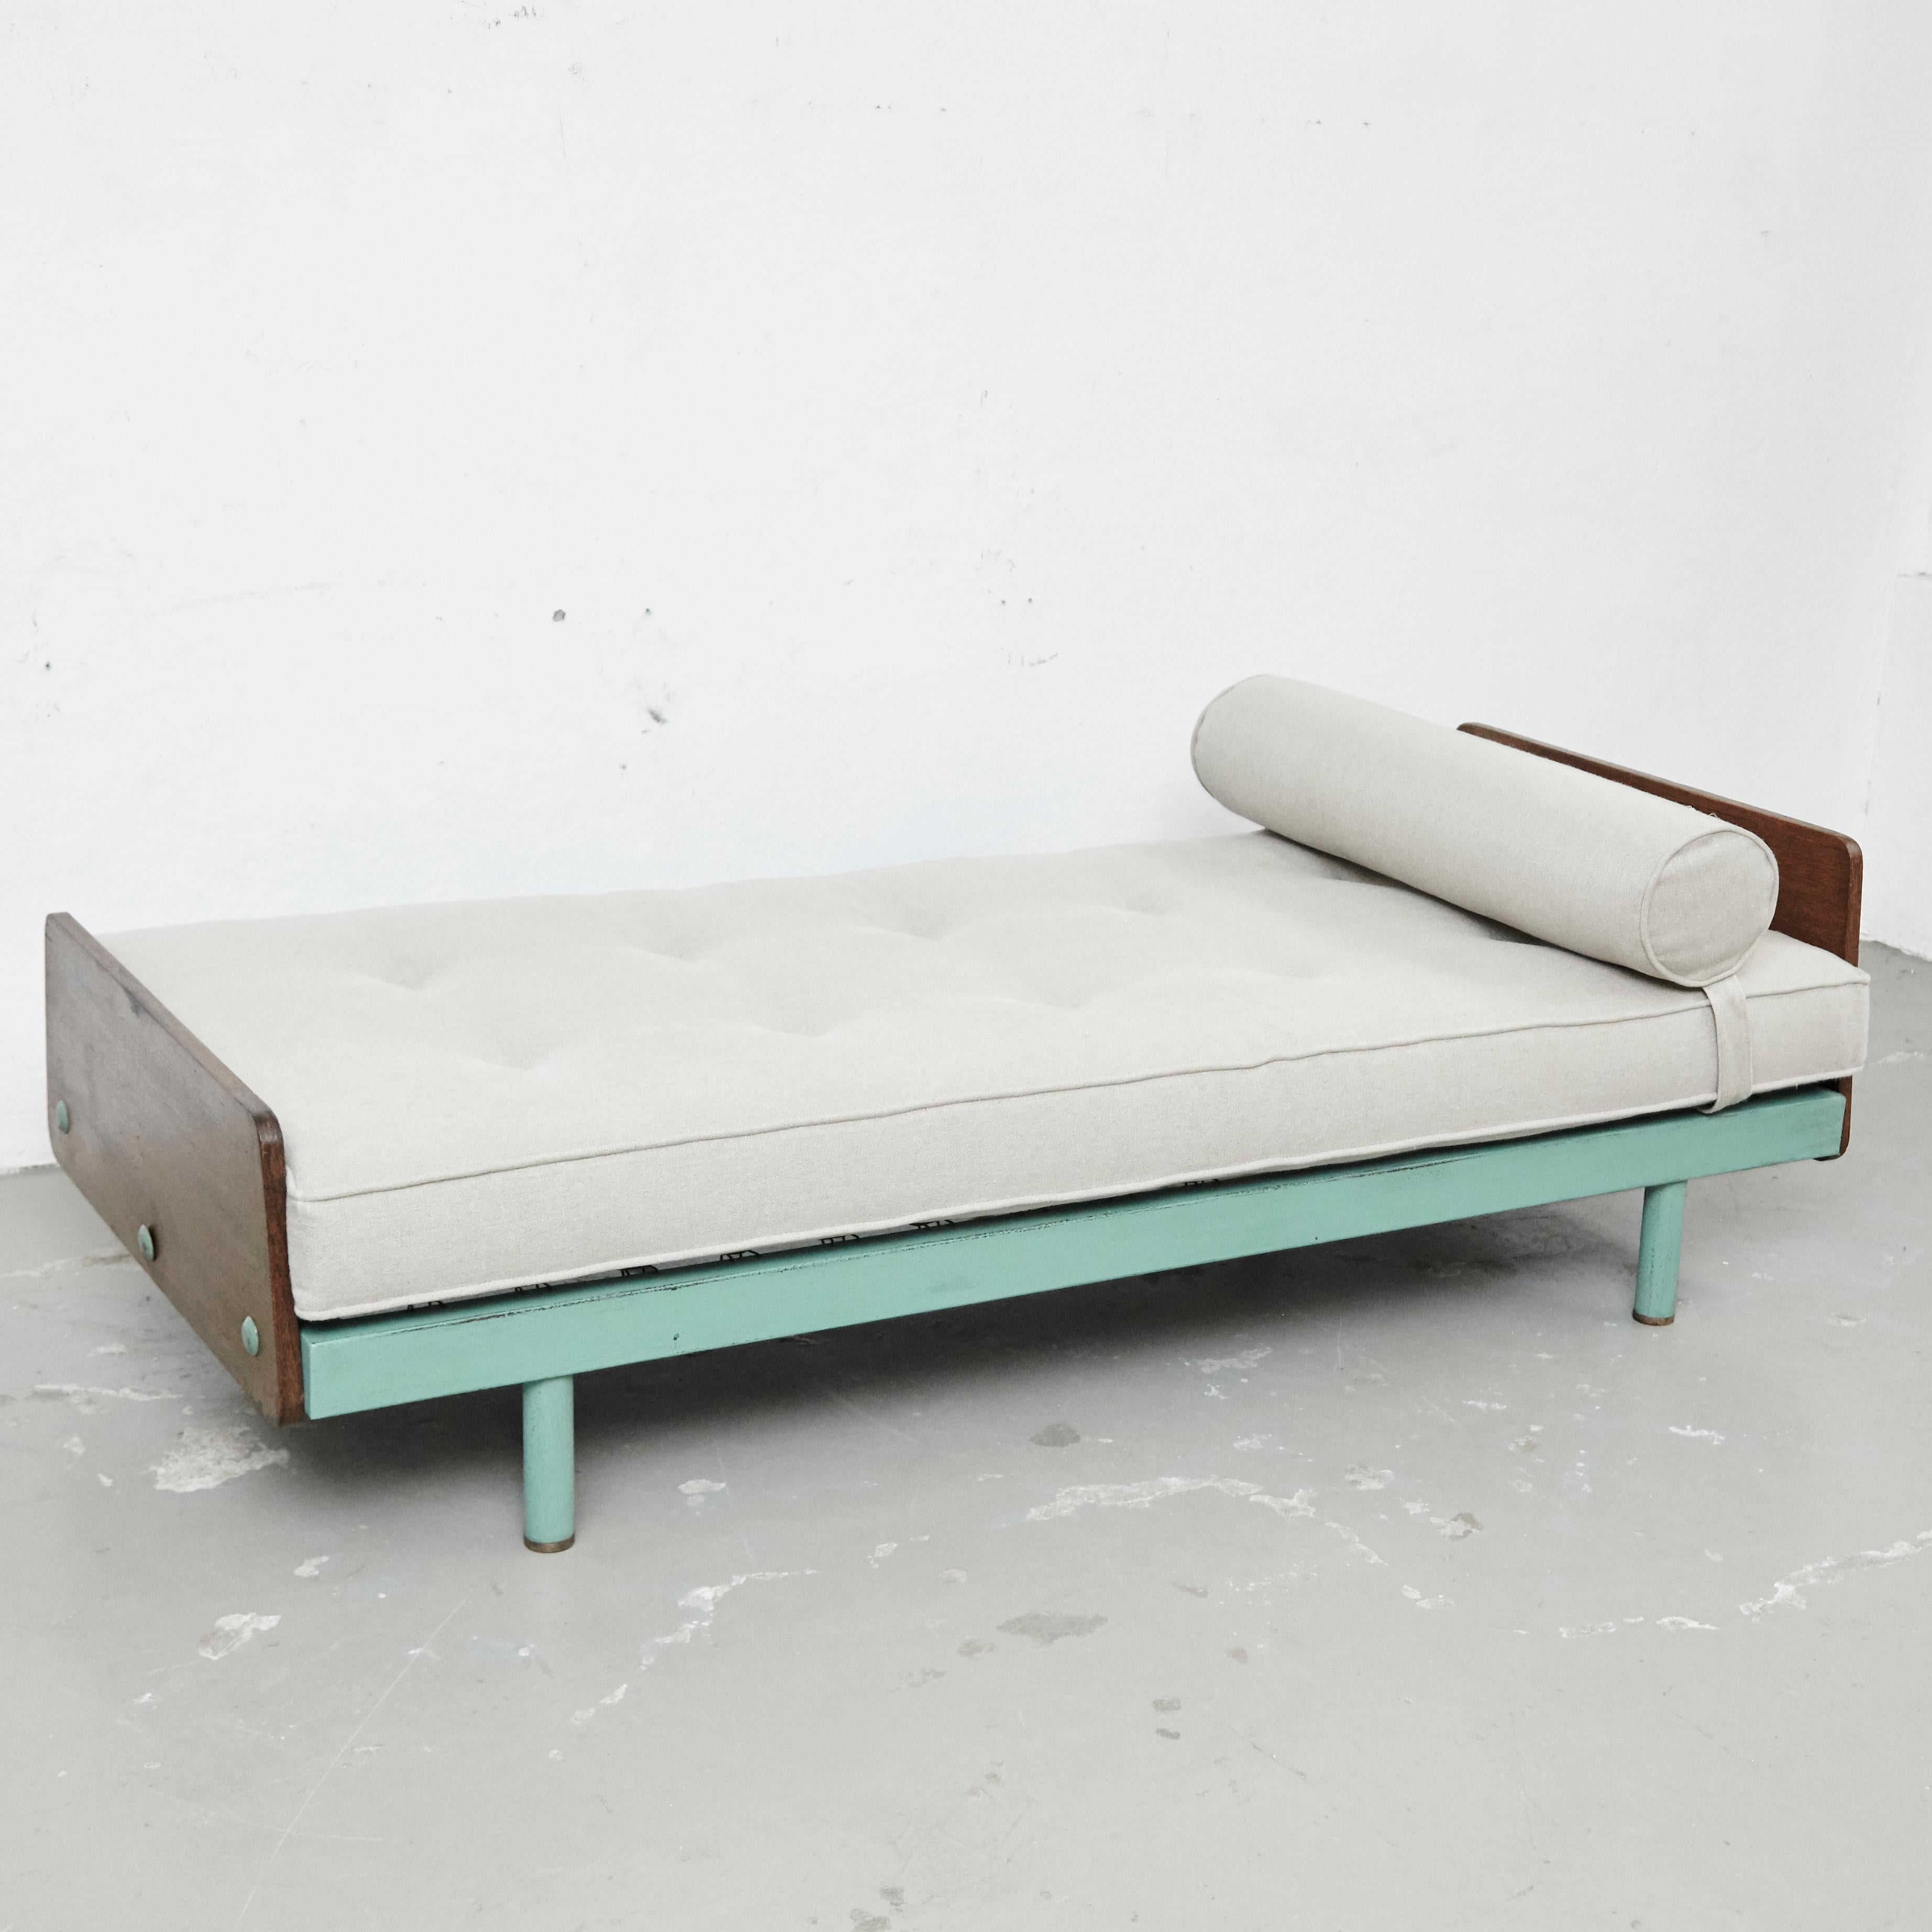 Daybed designed by Jean Prouvé manufactured by Ateliers Prouvé (France), circa 1950.

In original condition, with minor wear consistent with age and use, preserving a beautiful patina.
It has some traces of rust and the wood and metal has been